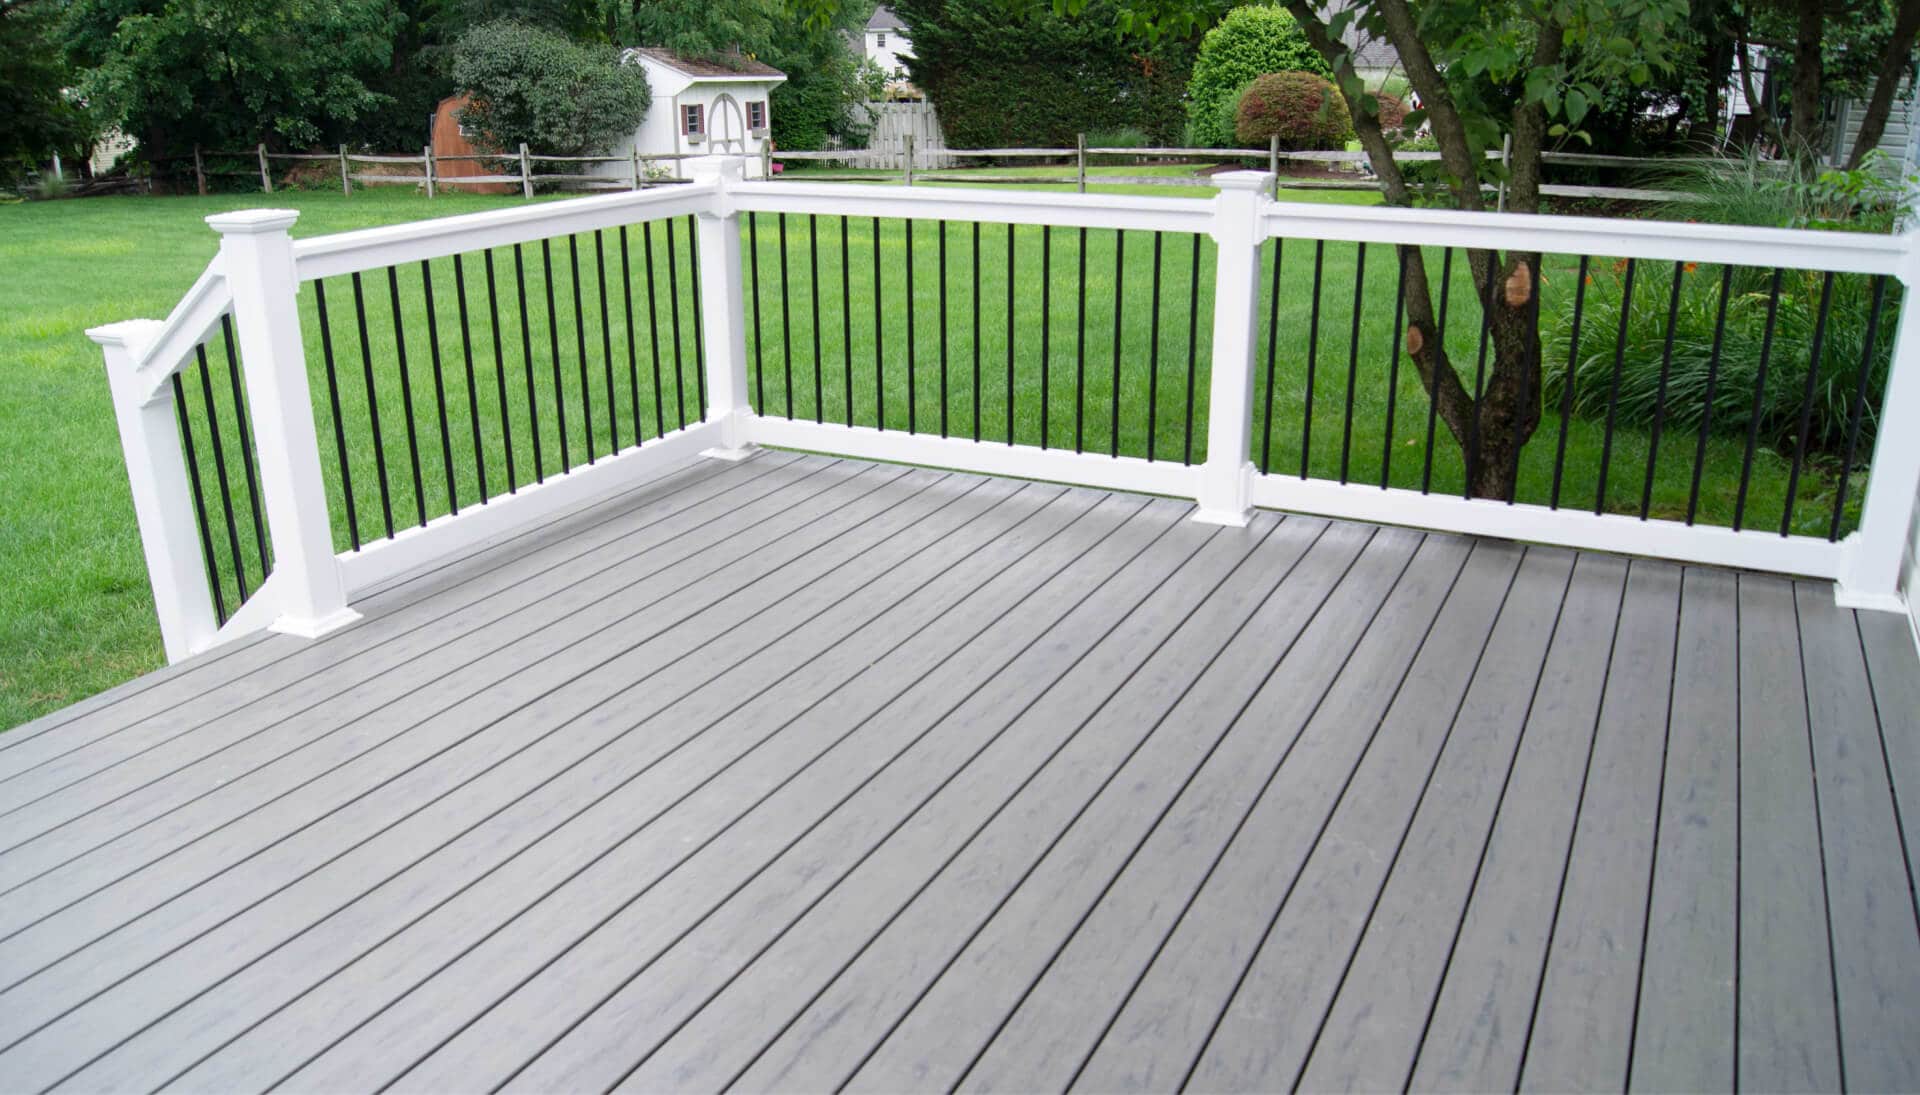 Deck Building Services in Indianapolis, IN: We Create Custom Railing and Covers for Your Deck